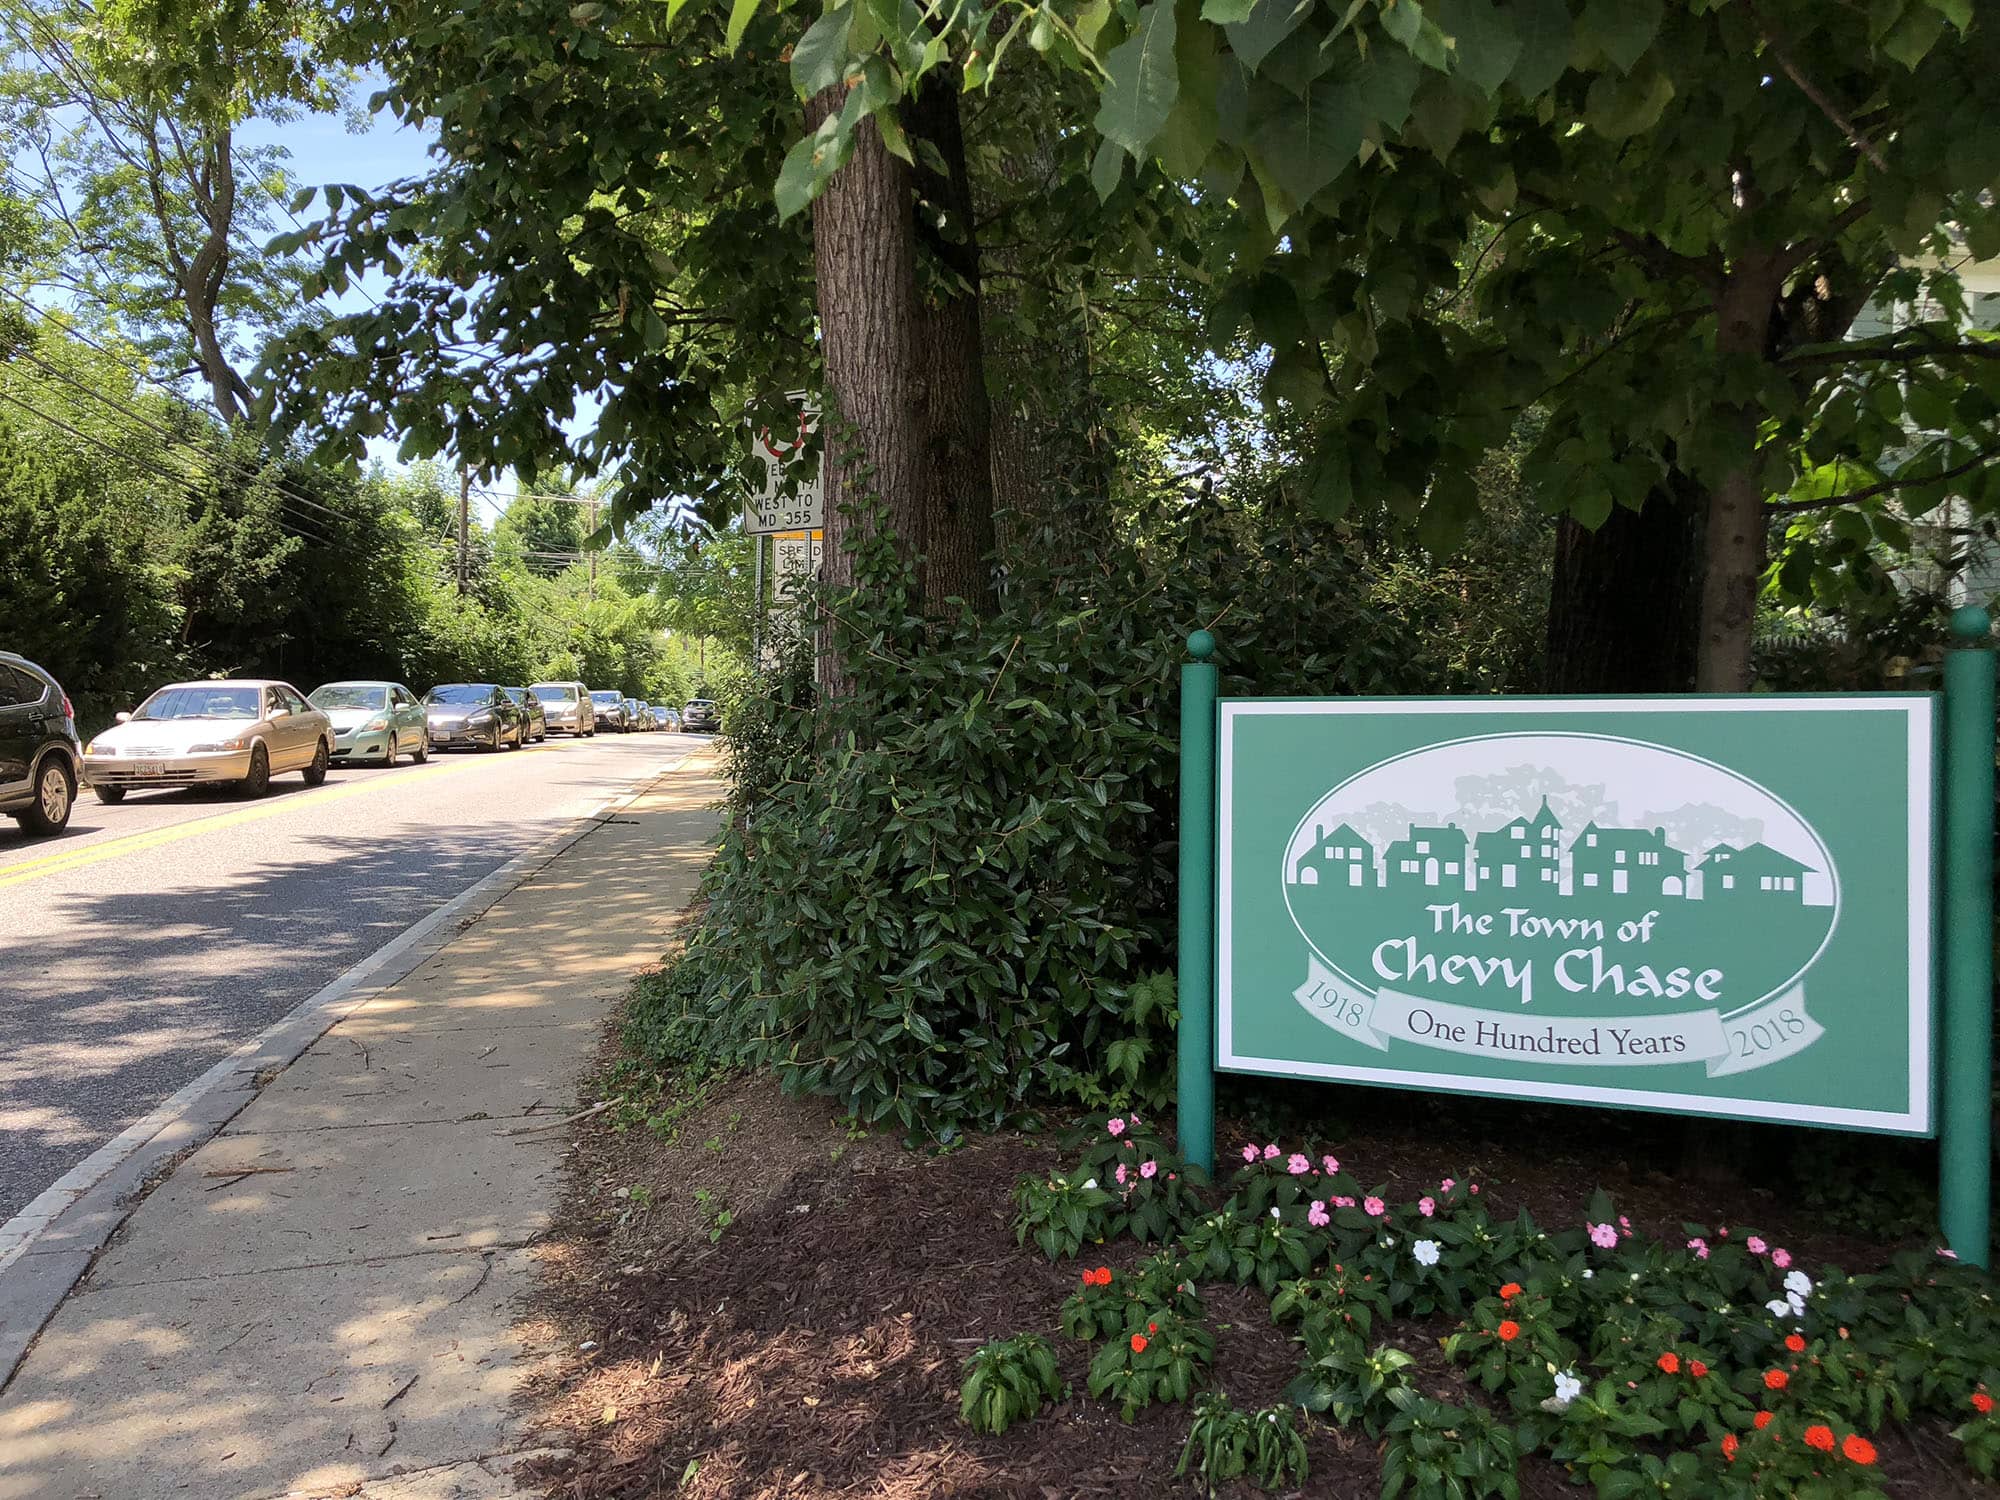 The Town of Chevy Chase sign